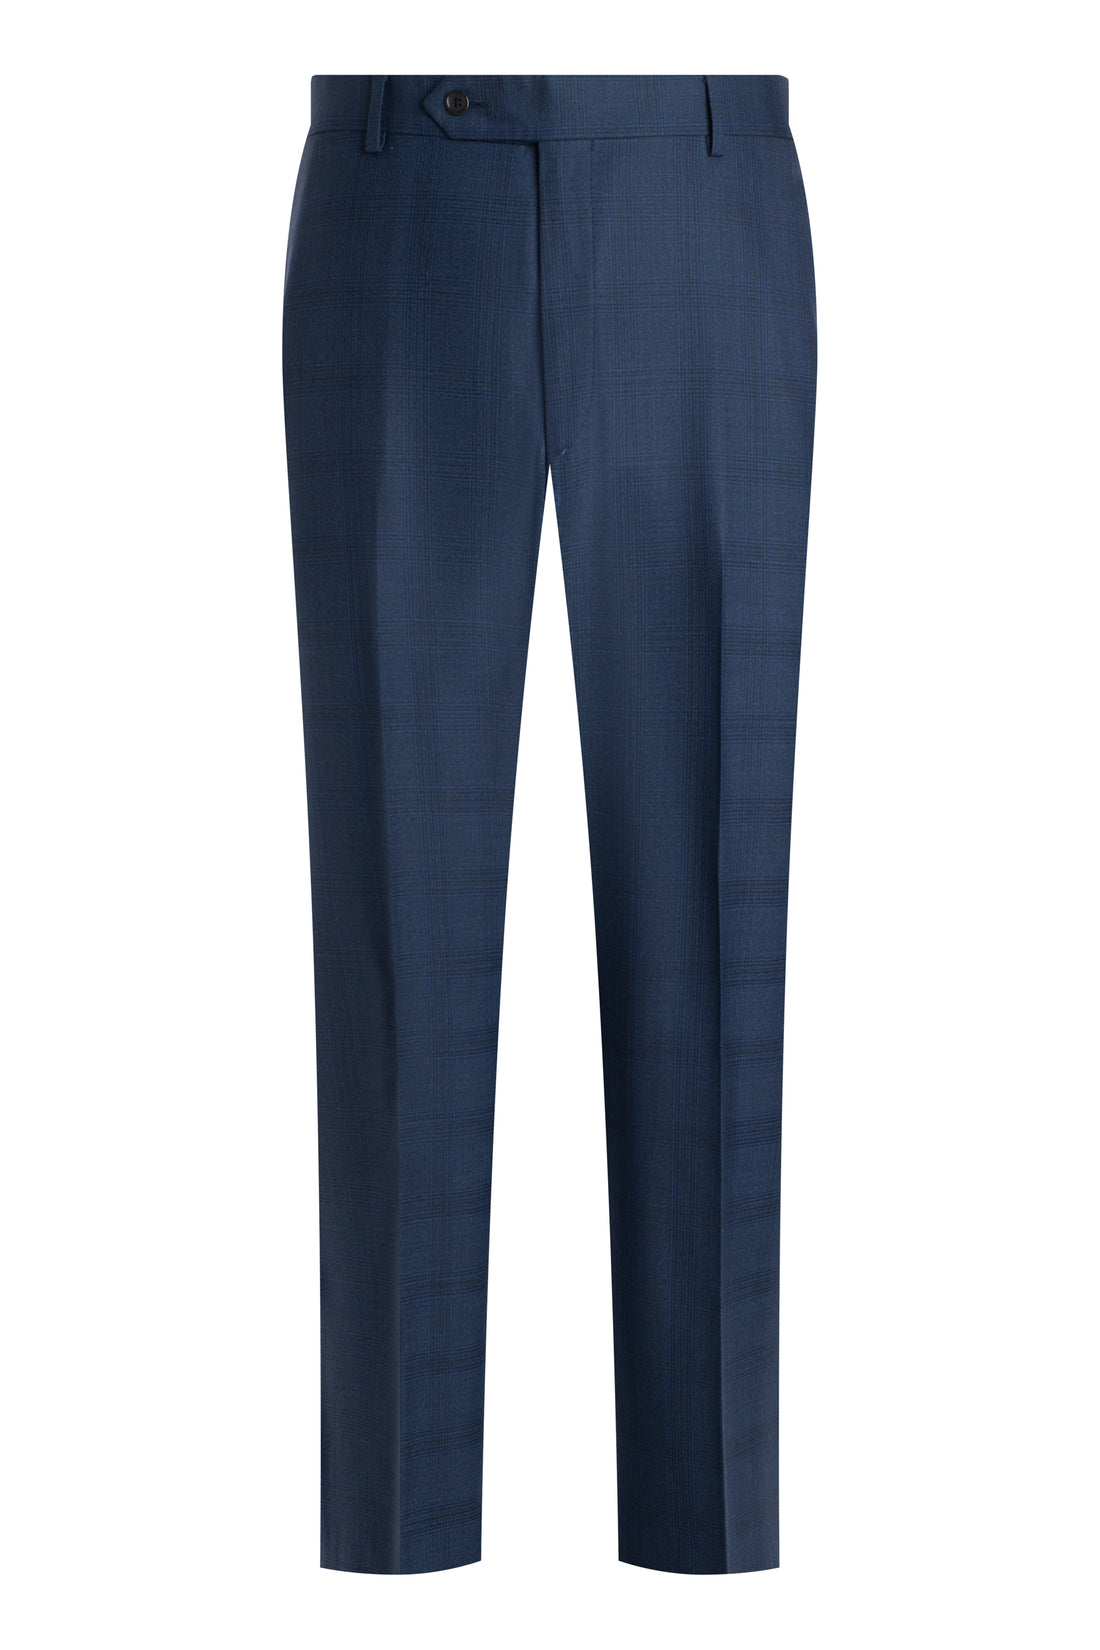 Navy Wool Natural Bistretch Plaid Suit